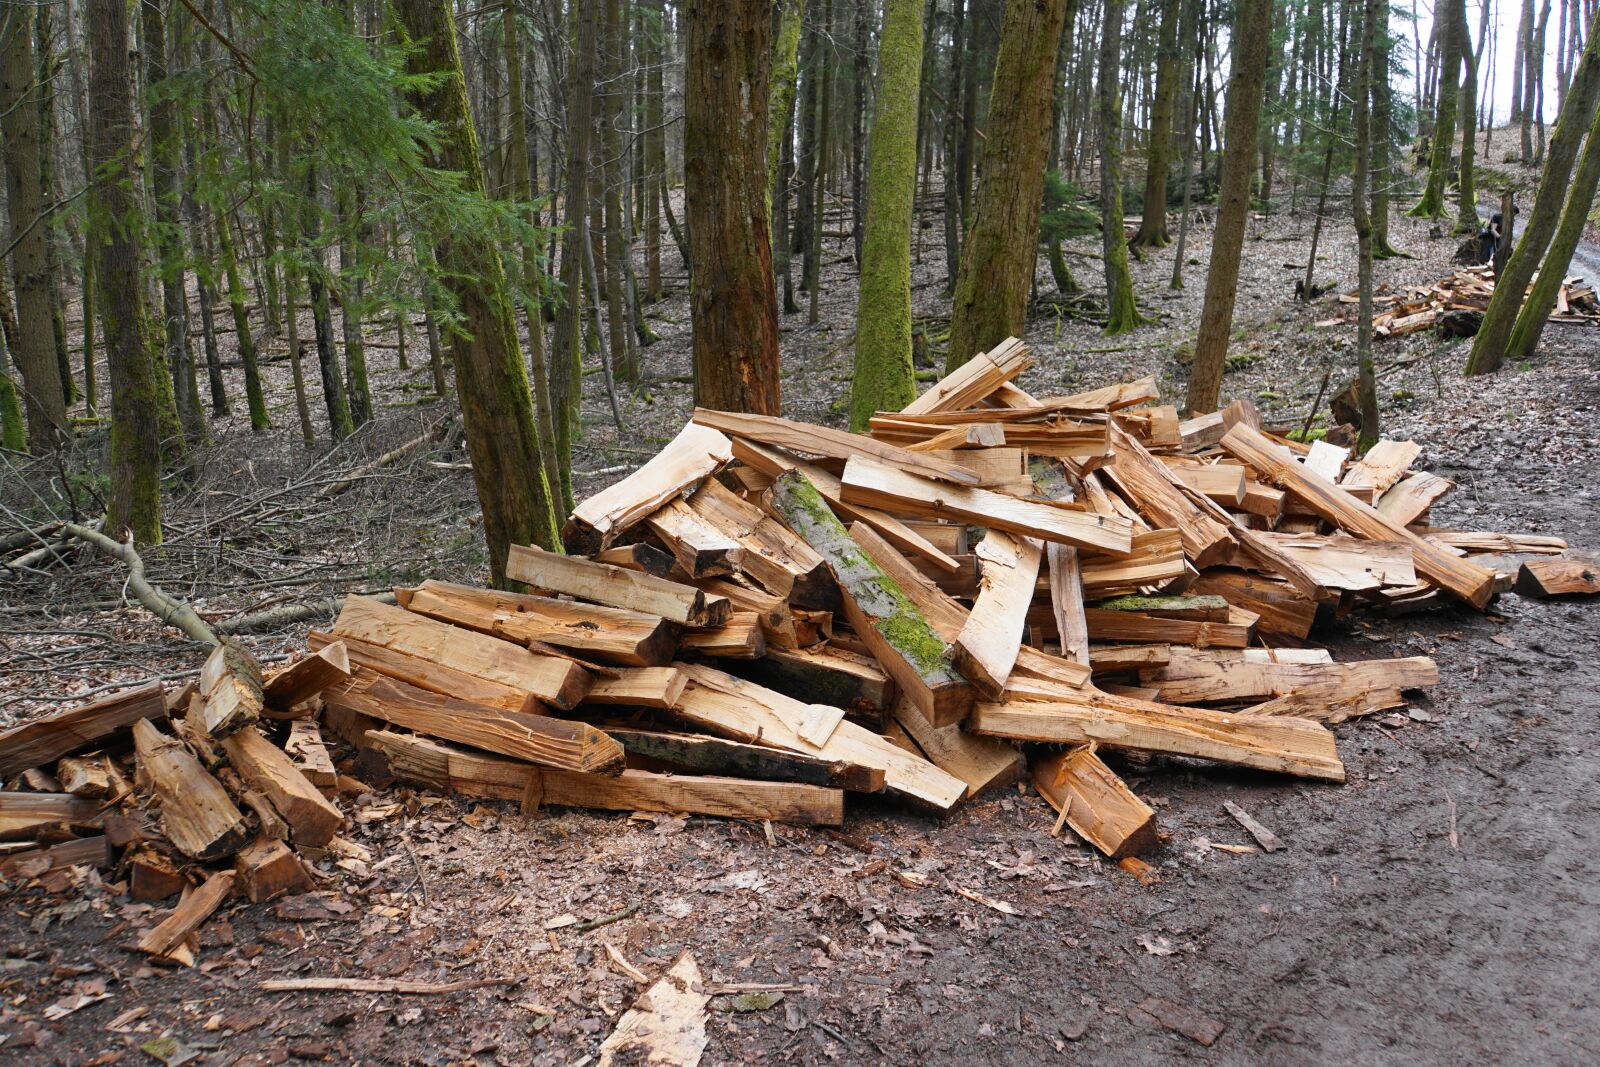 Sony a6000 sample photo. Firewood, wood, growing stock photography